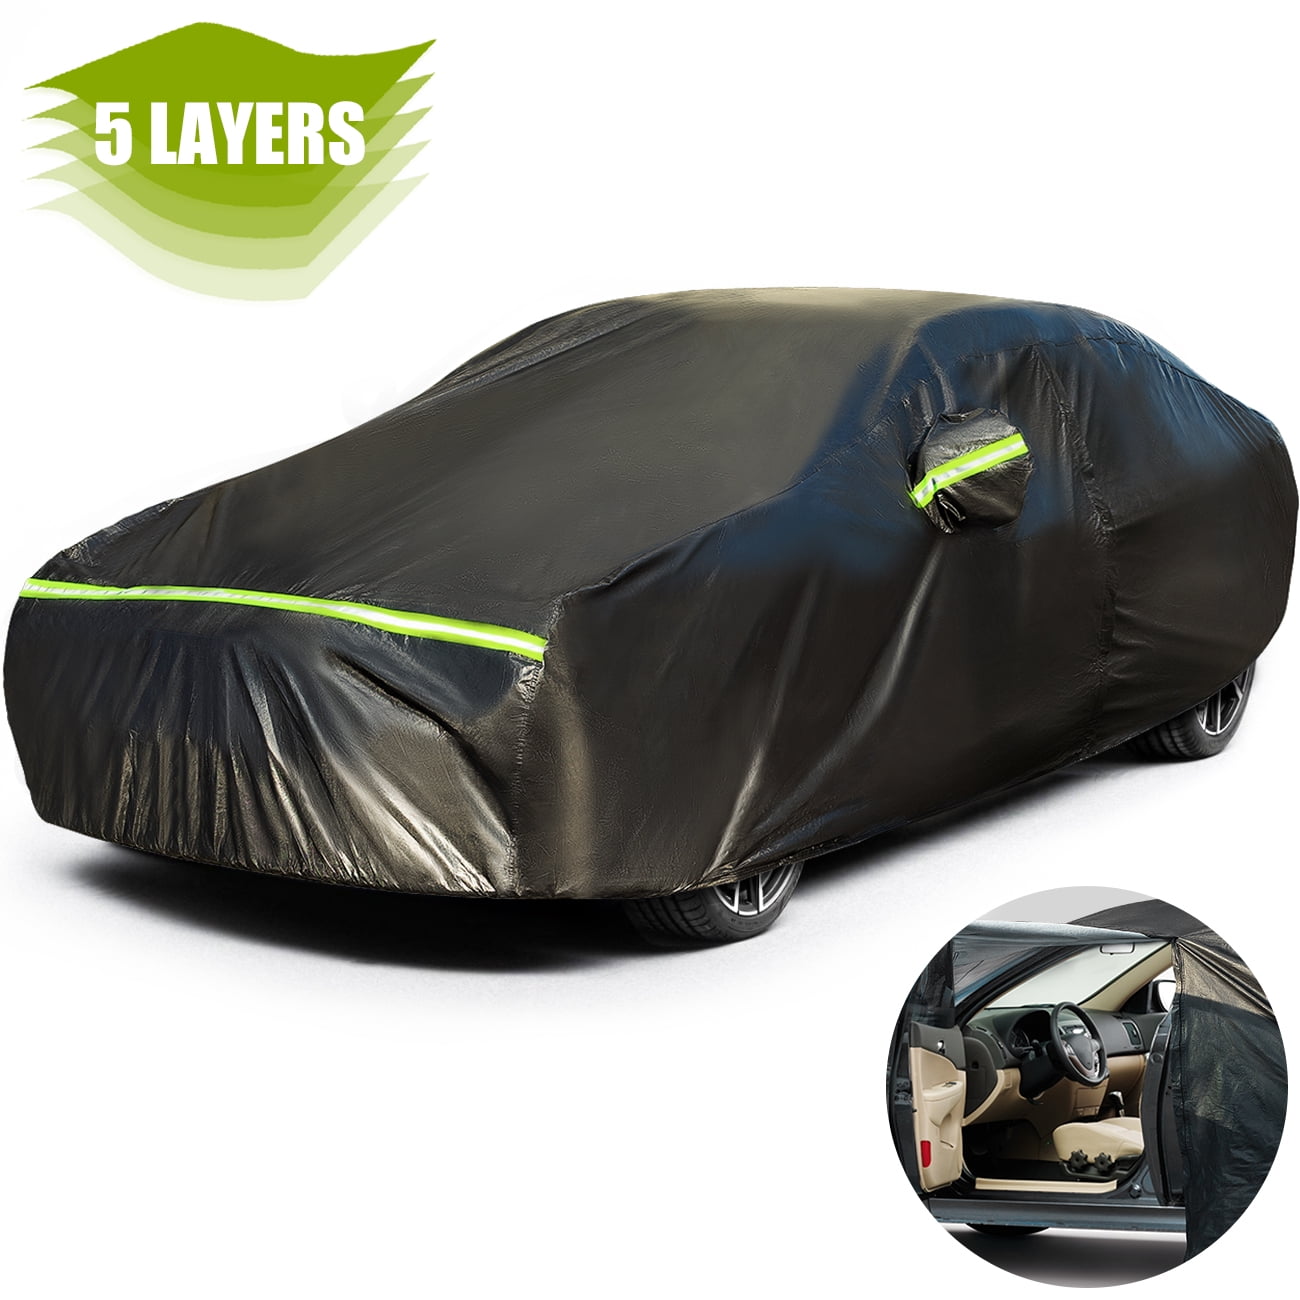 Favoto Full Car Cover Sedan Cover Universal Fit 167-185 Inch 5 Layer Heavy Duty Sun Protection Waterproof Dustproof Snowproof Windproof Scratch Resistant with Storage Bag Sedan Cover 